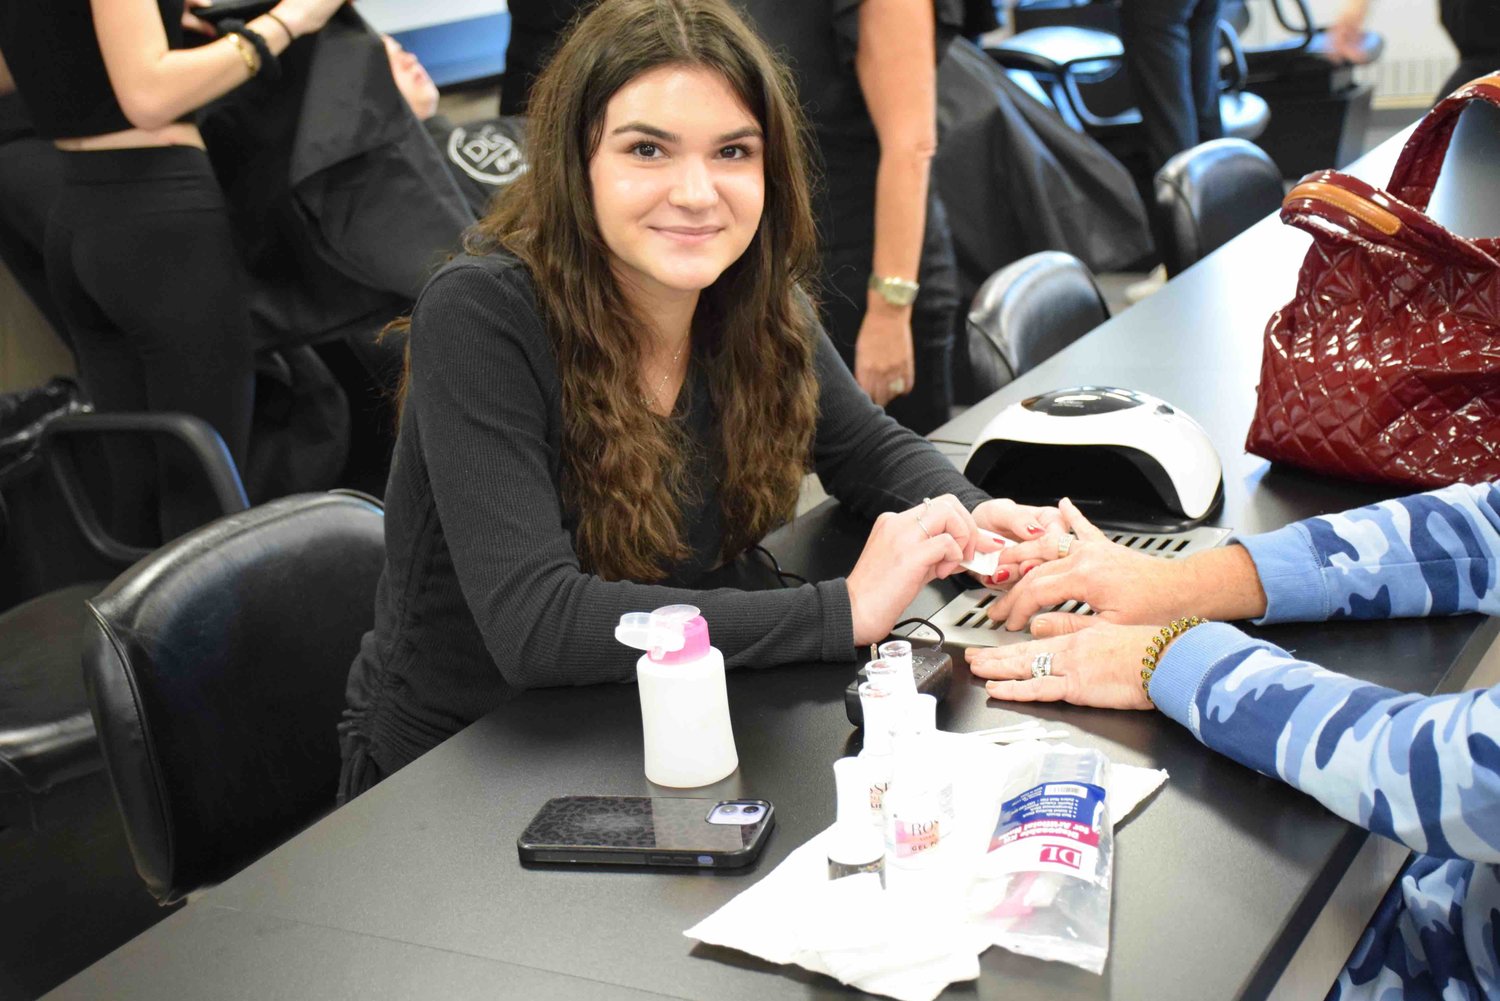 Rebecca Zollo gave a manicure at a new table meant specifically for nail work.